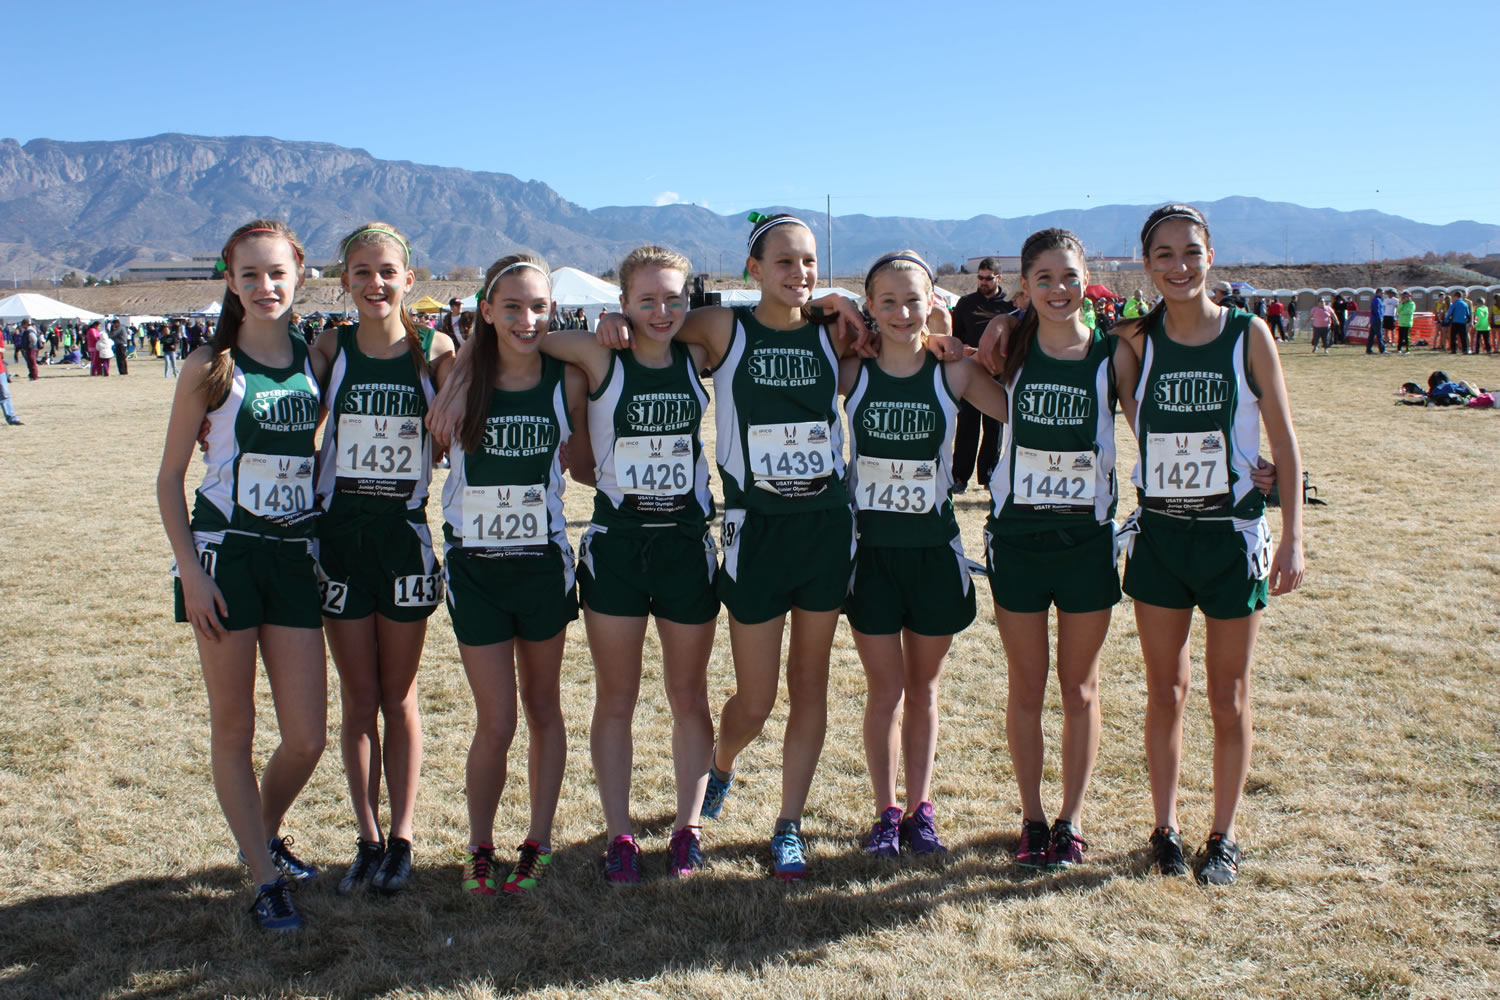 The Evergreen Storm Track Club's youth girls team pictured before the USATF Junior Olympic Cross Country National Championships.